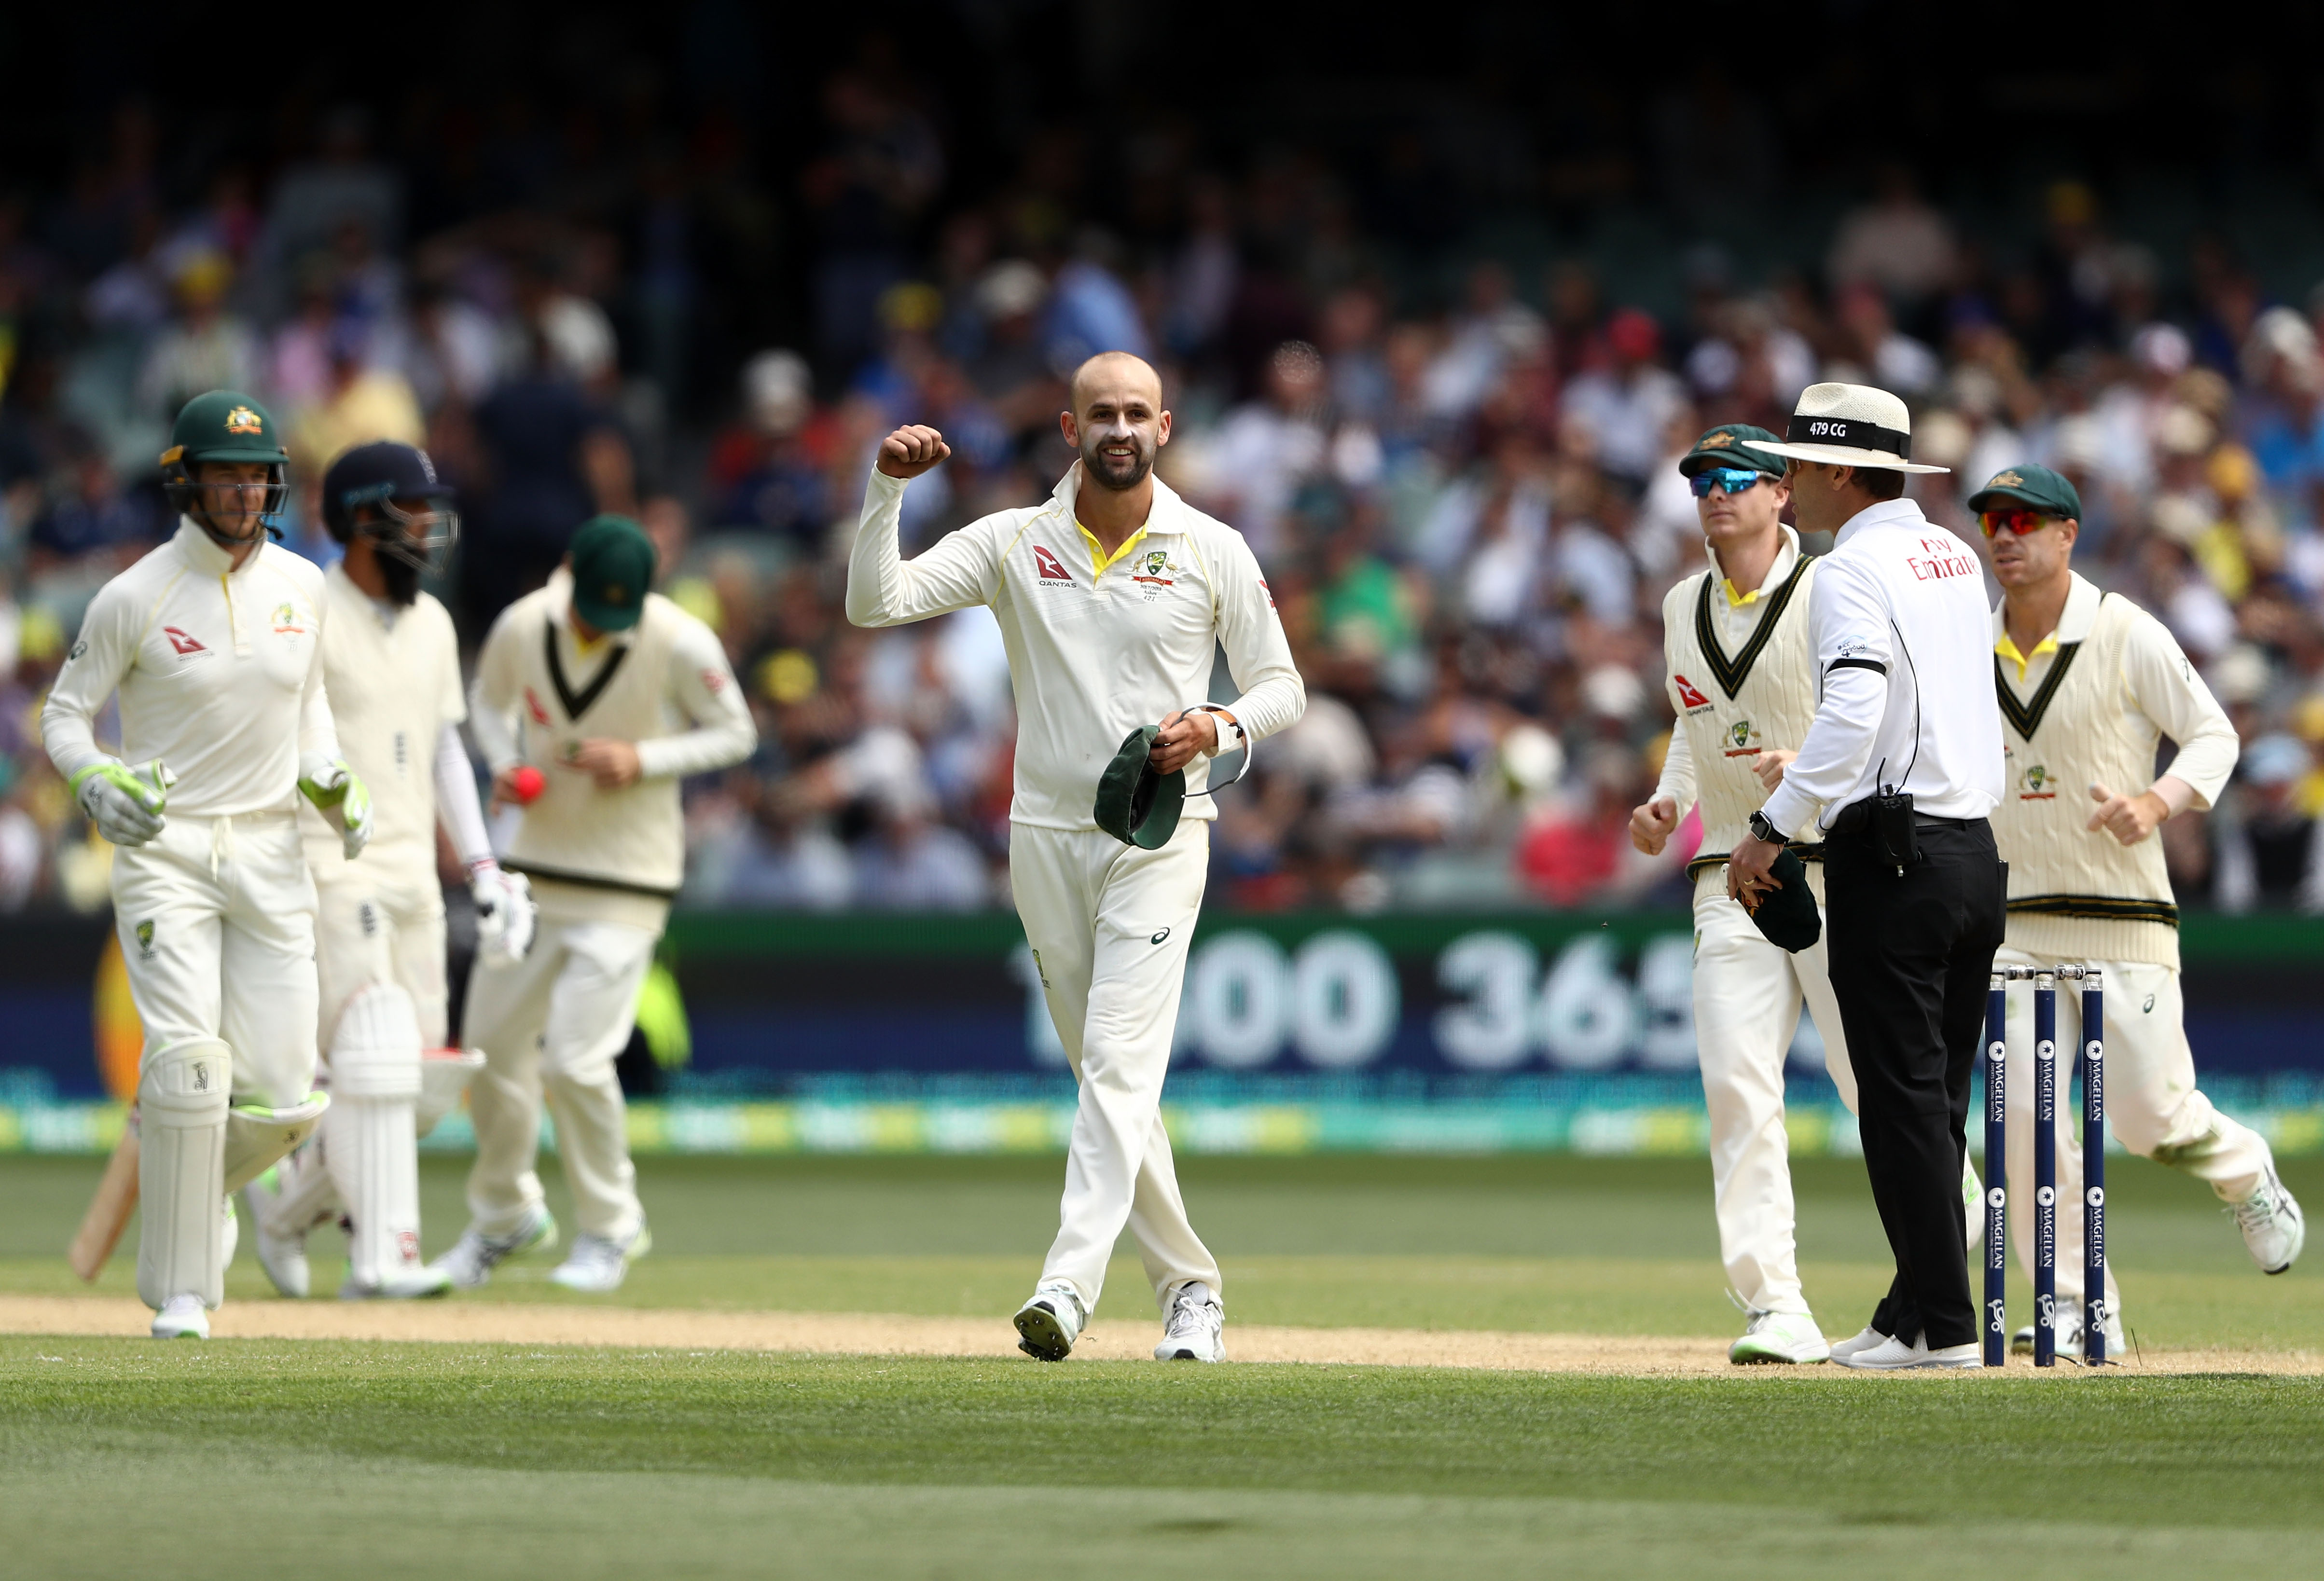 VIDEO | Nathan Lyon turns umpire to guide Ishant Sharma about his off-stump